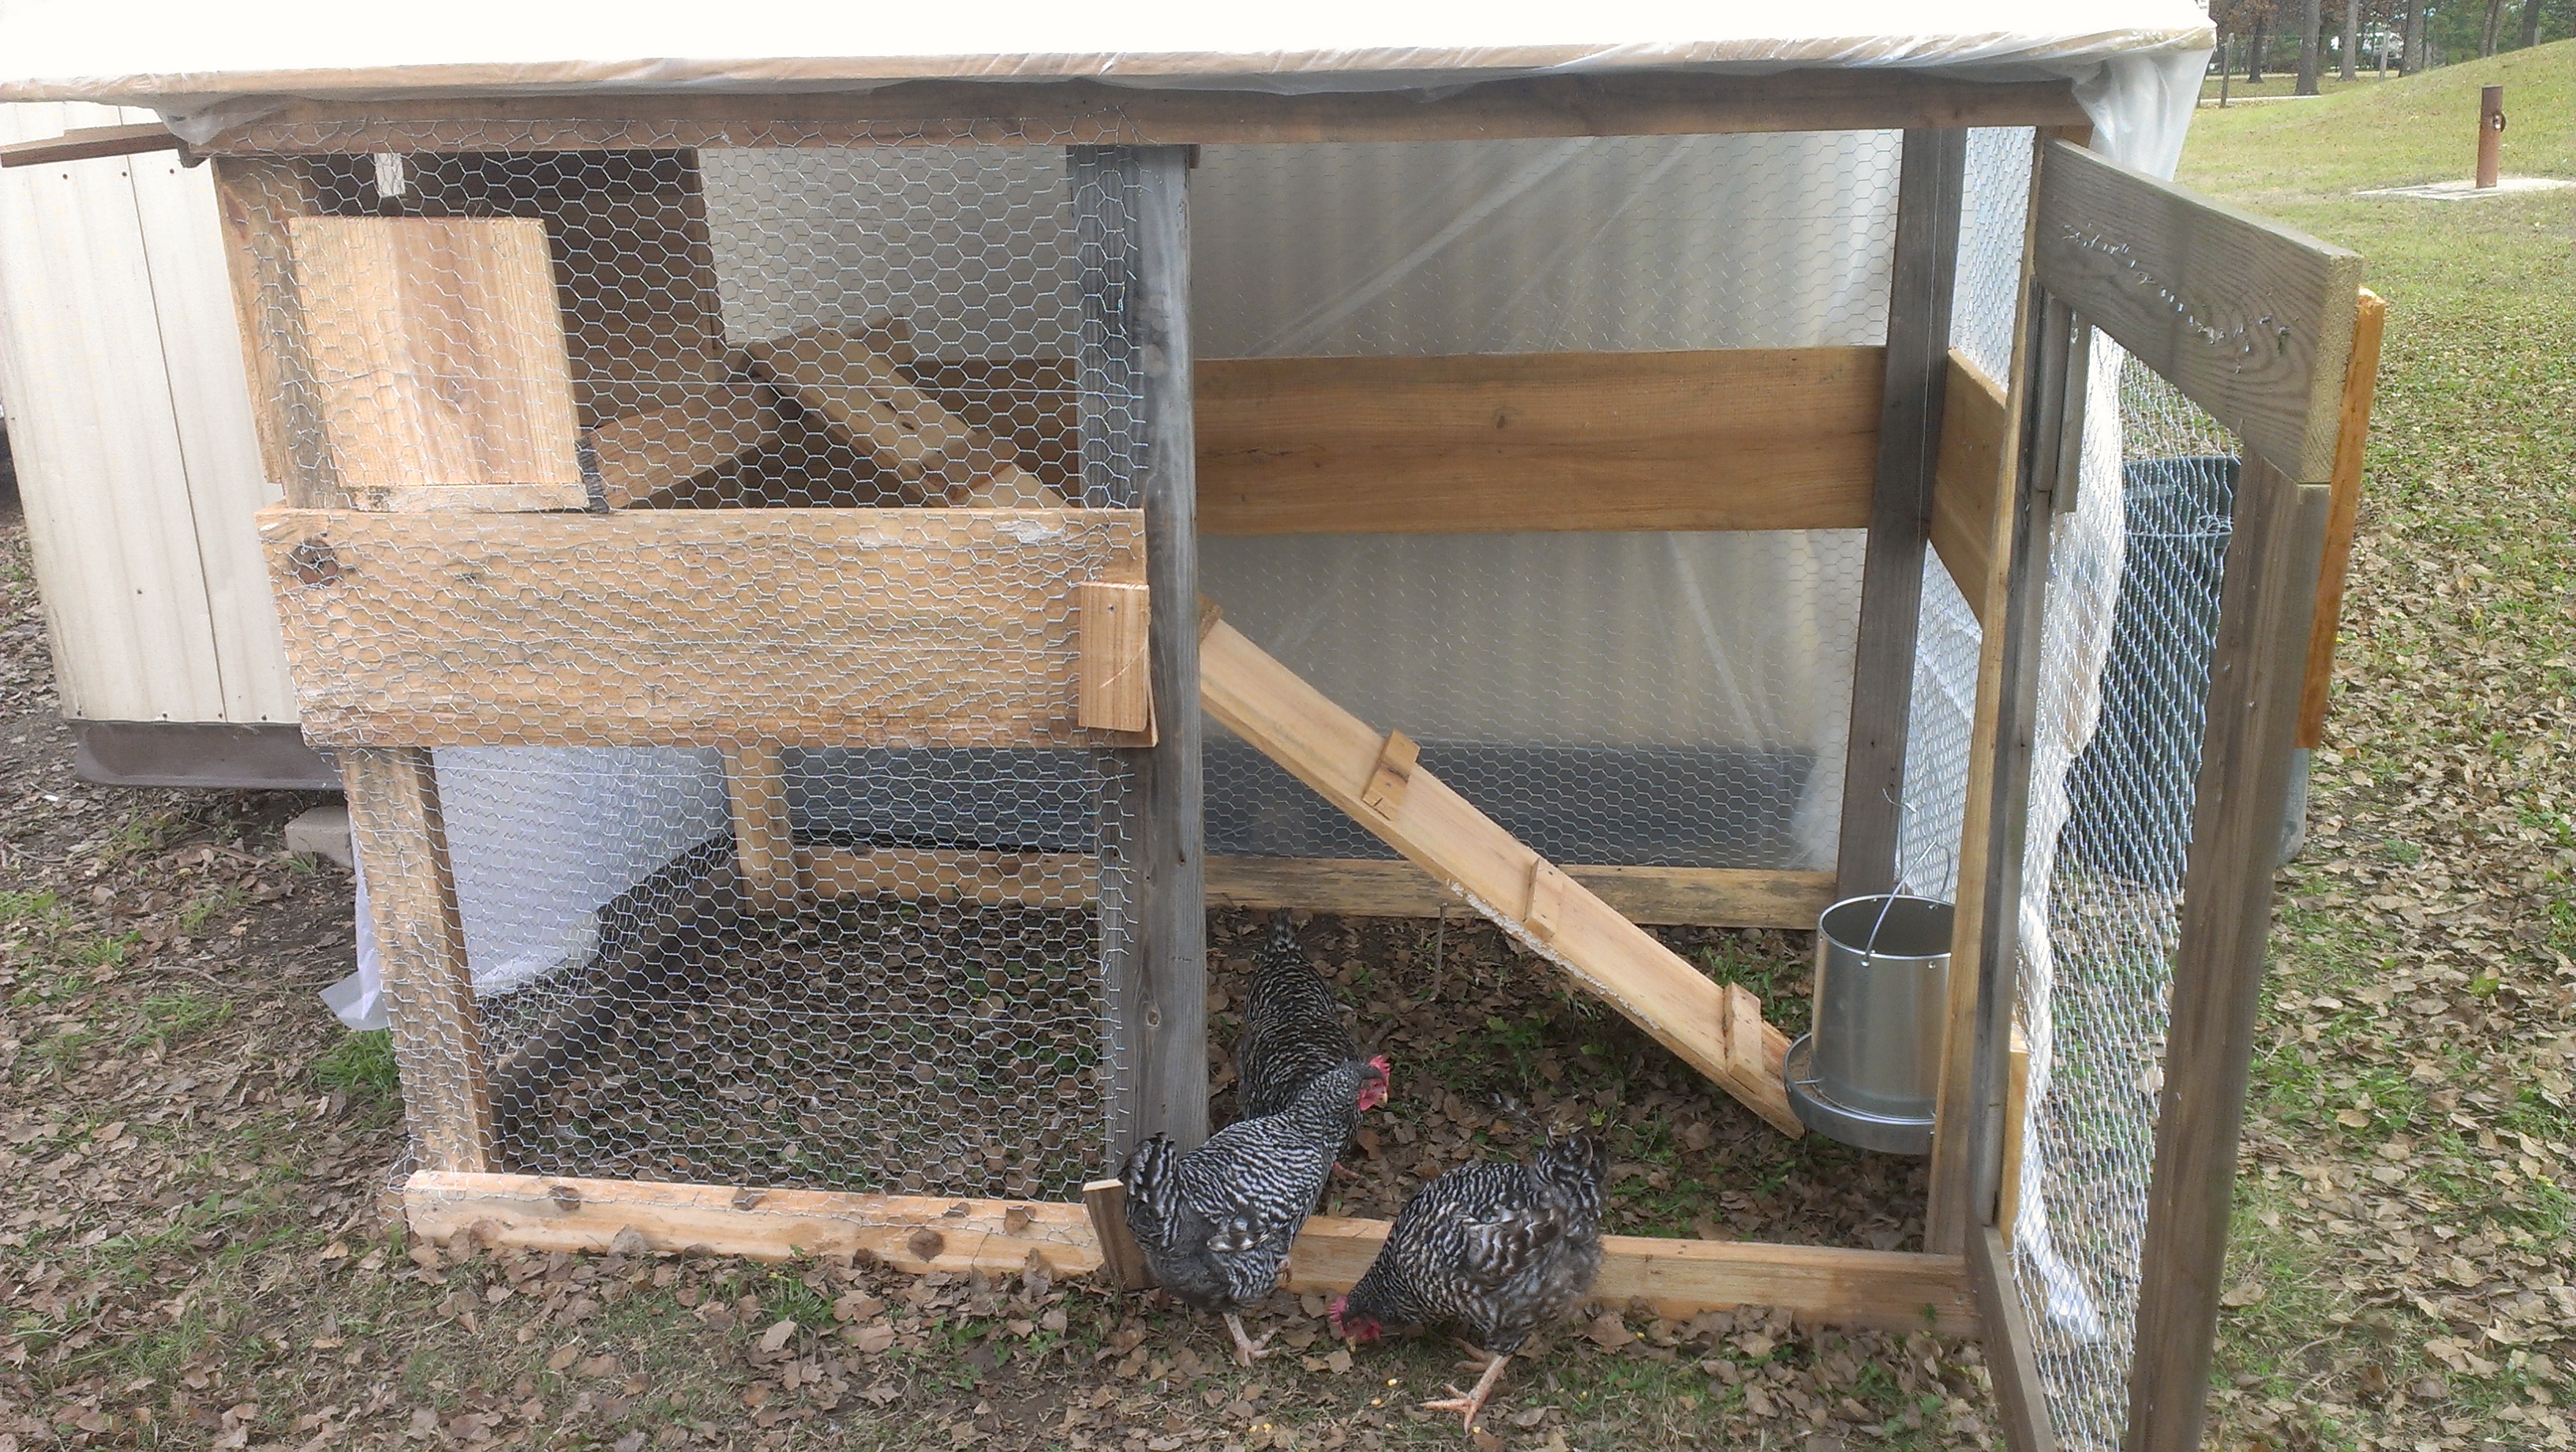 First day after bringing home my Barred Rock hens from Baldhill Farms near Lufkin, TX